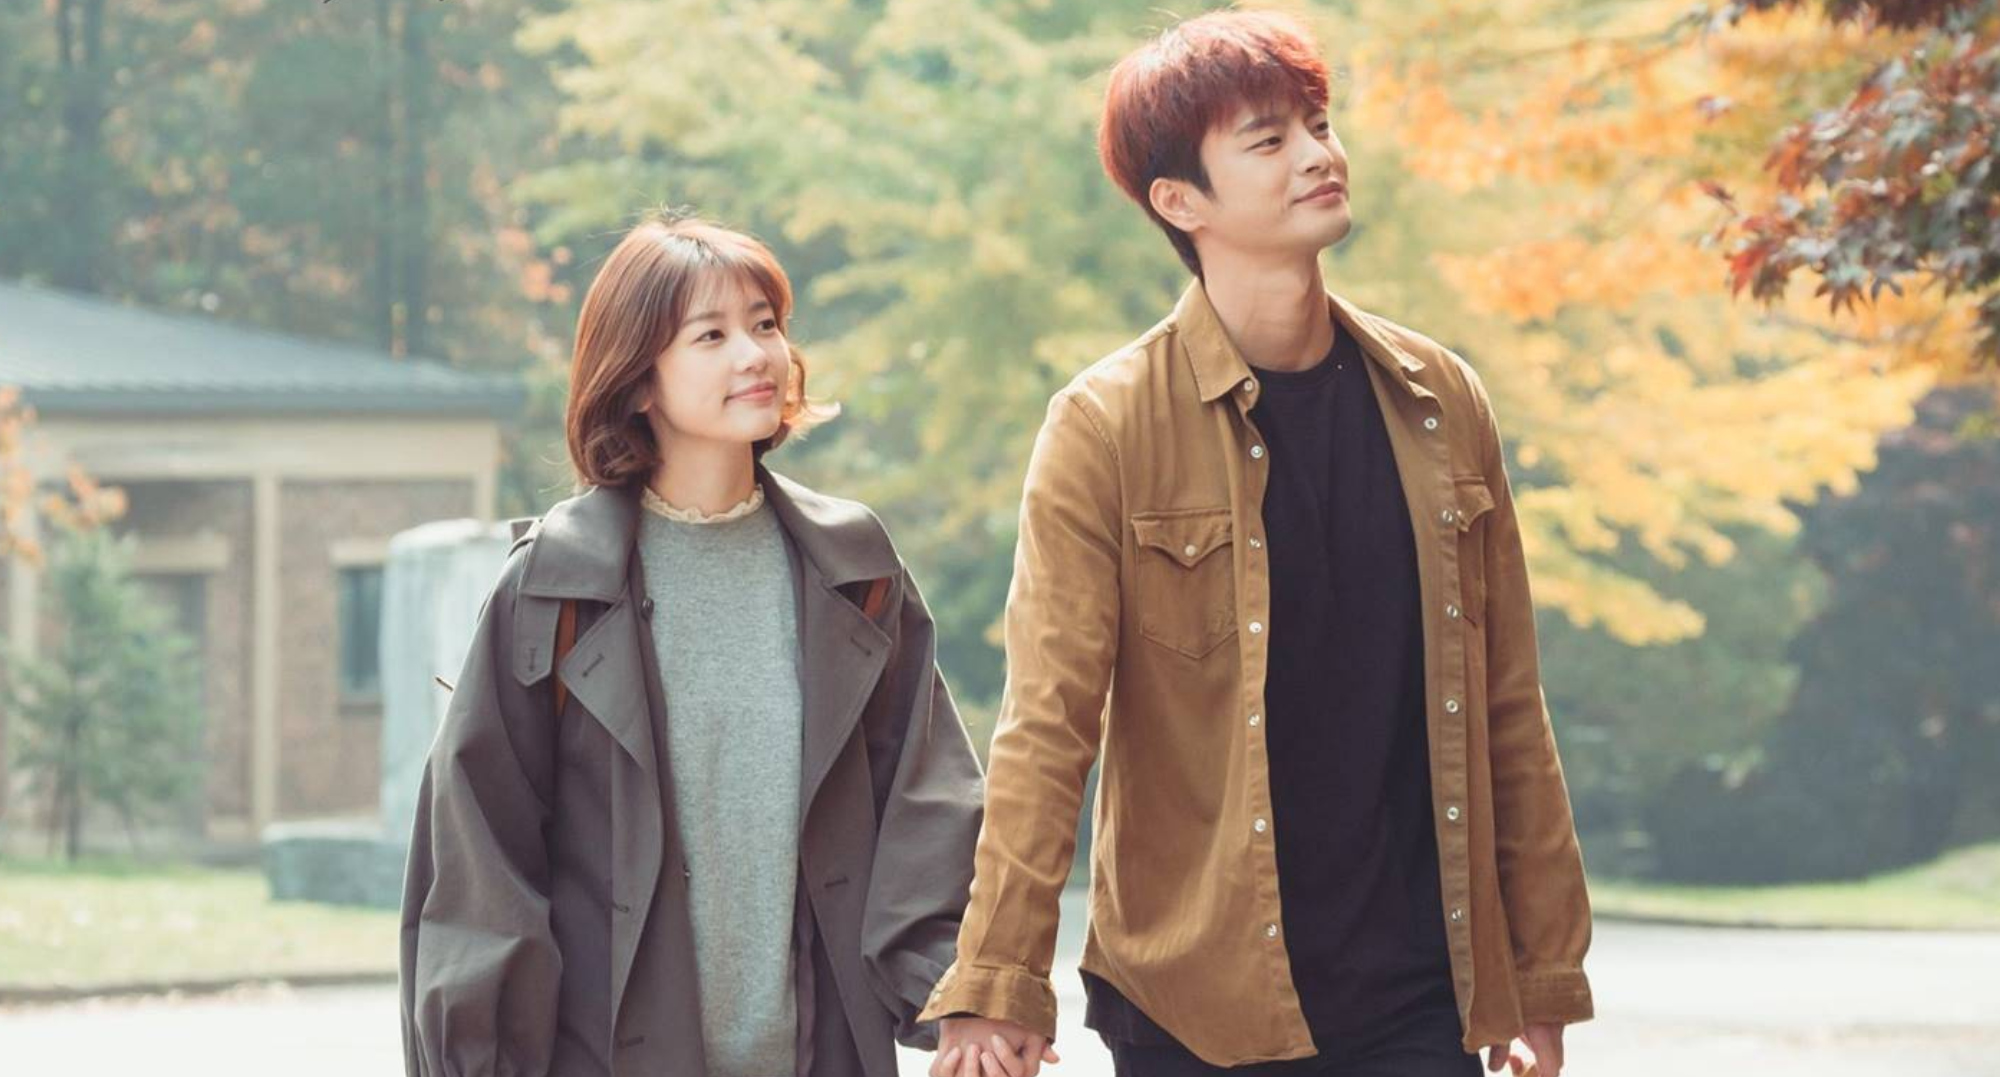 Jung So-min and Seo In-guk in 'The Smile Has Left Your Eyes' K-drama for Fall 2022.